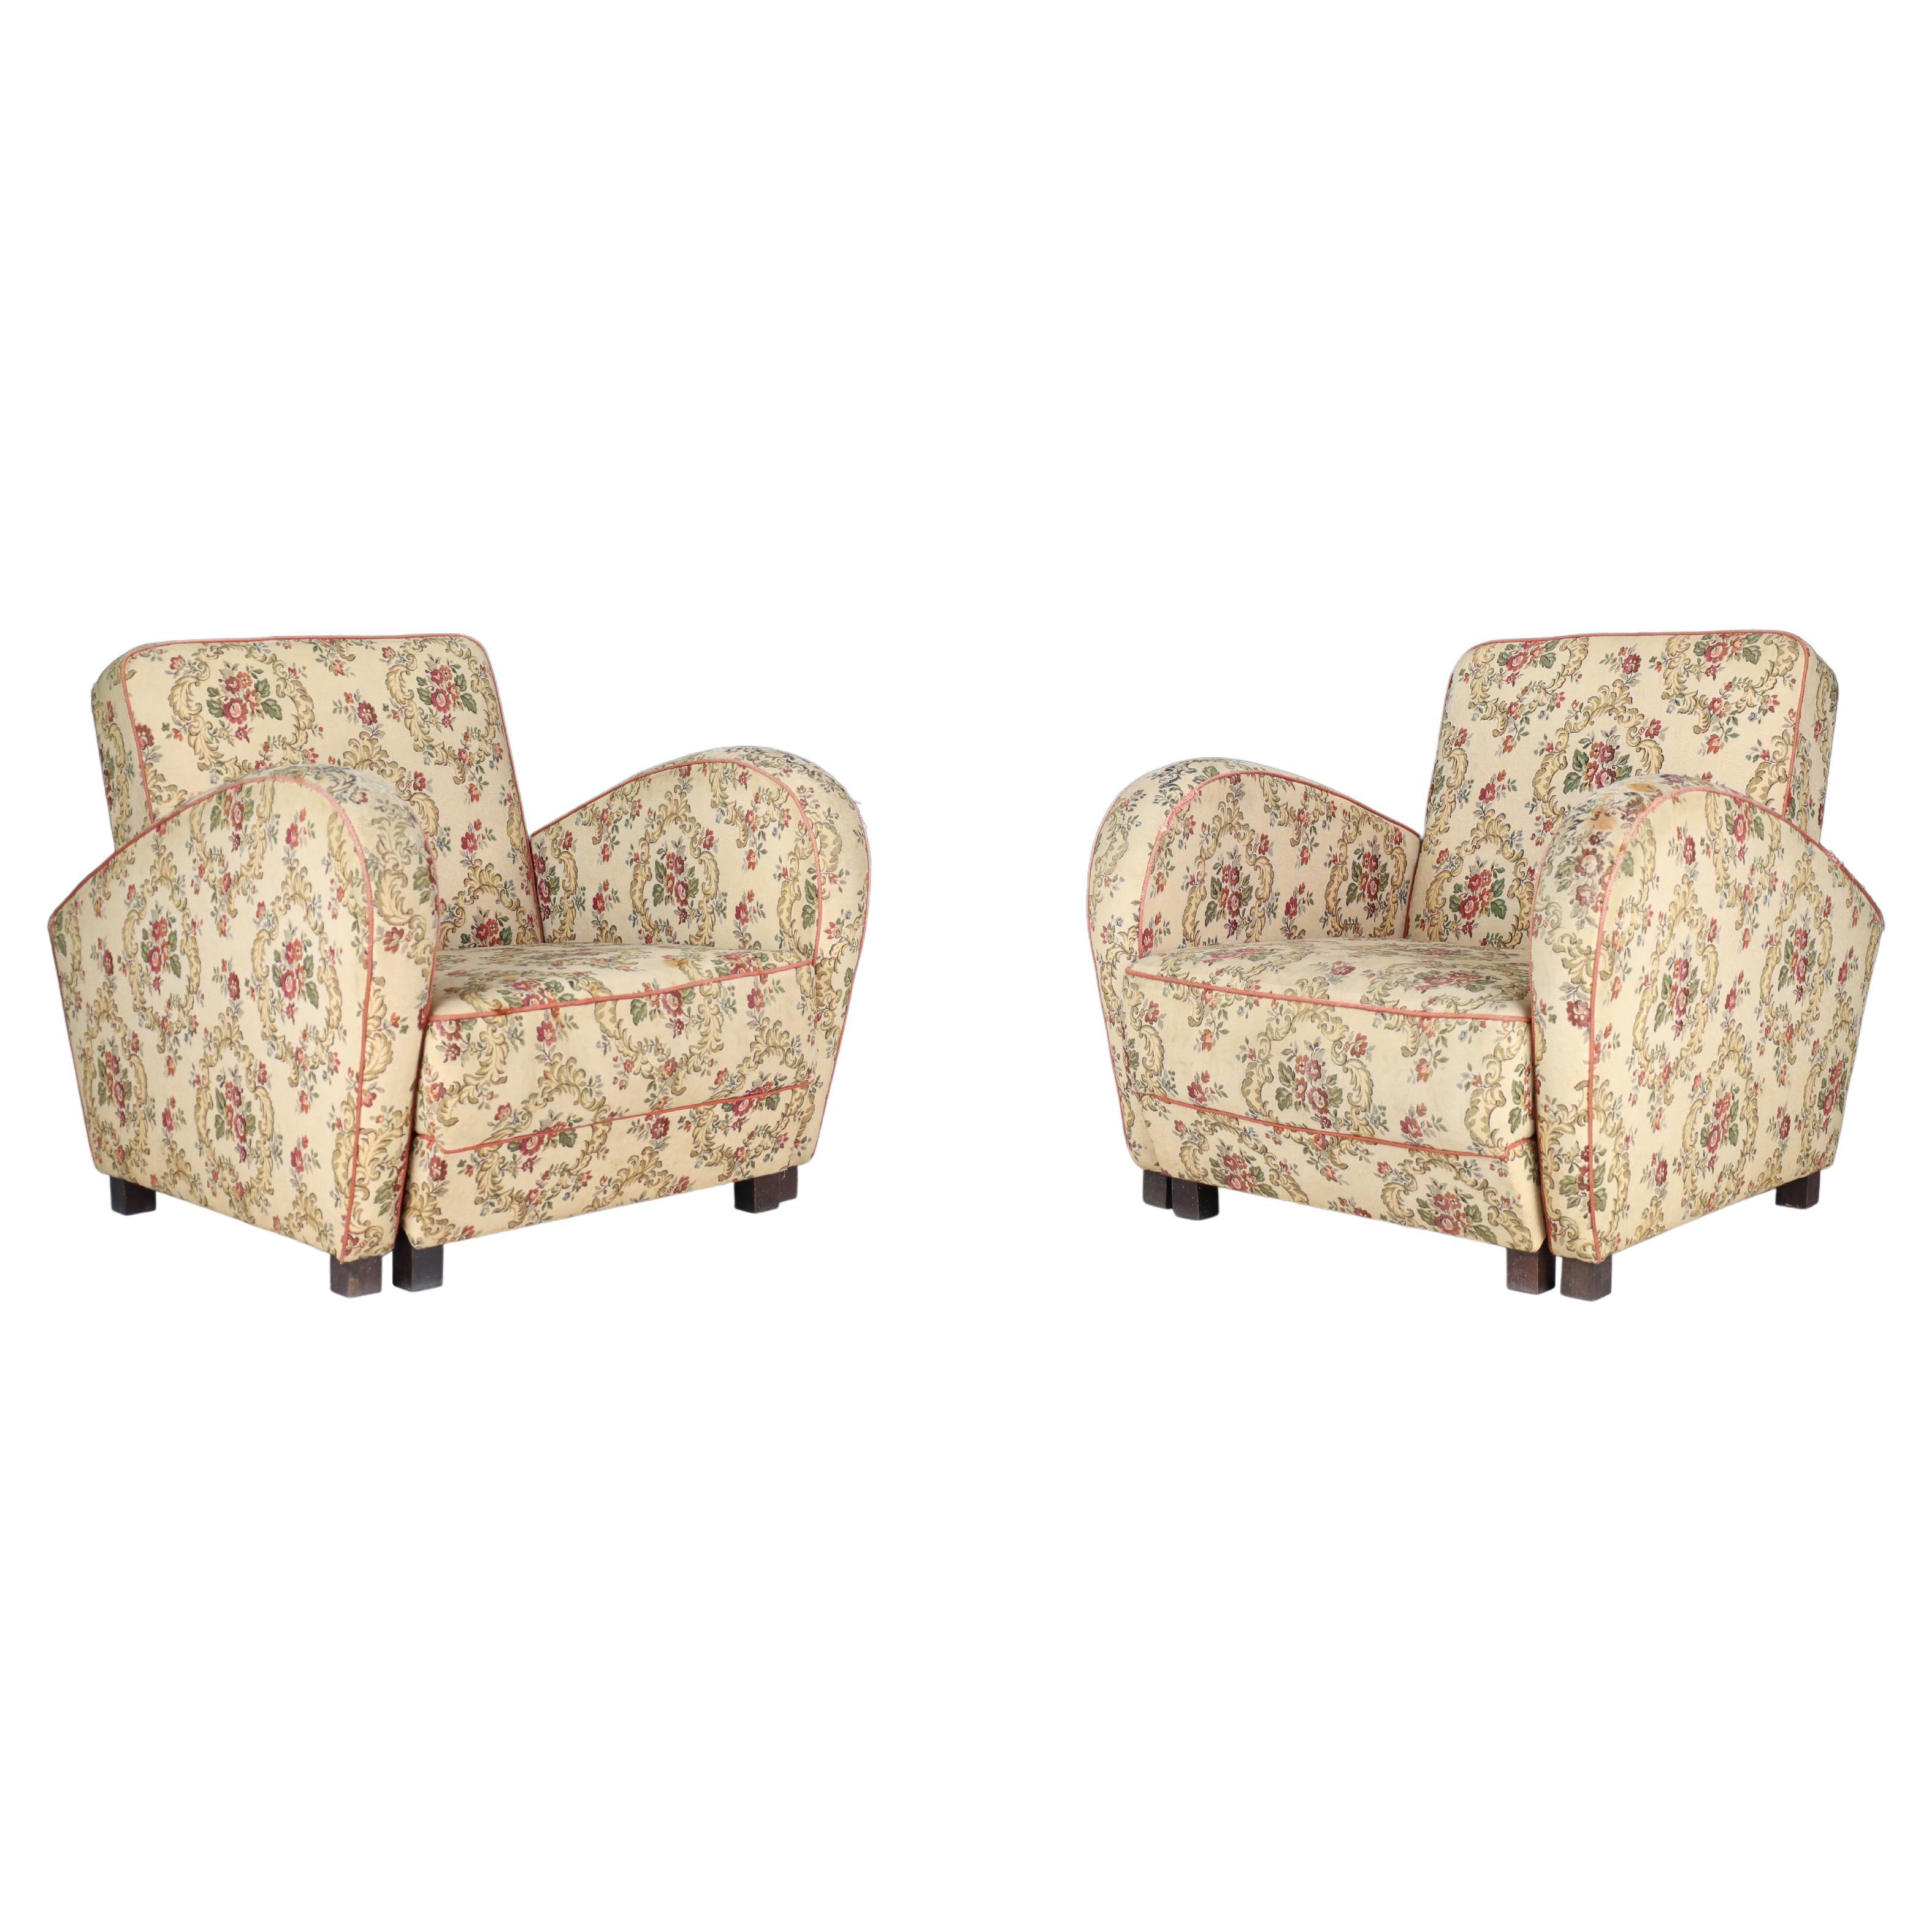 Jindrich Halabala Art Deco Lounge Chairs in Floral Upholstery For Sale